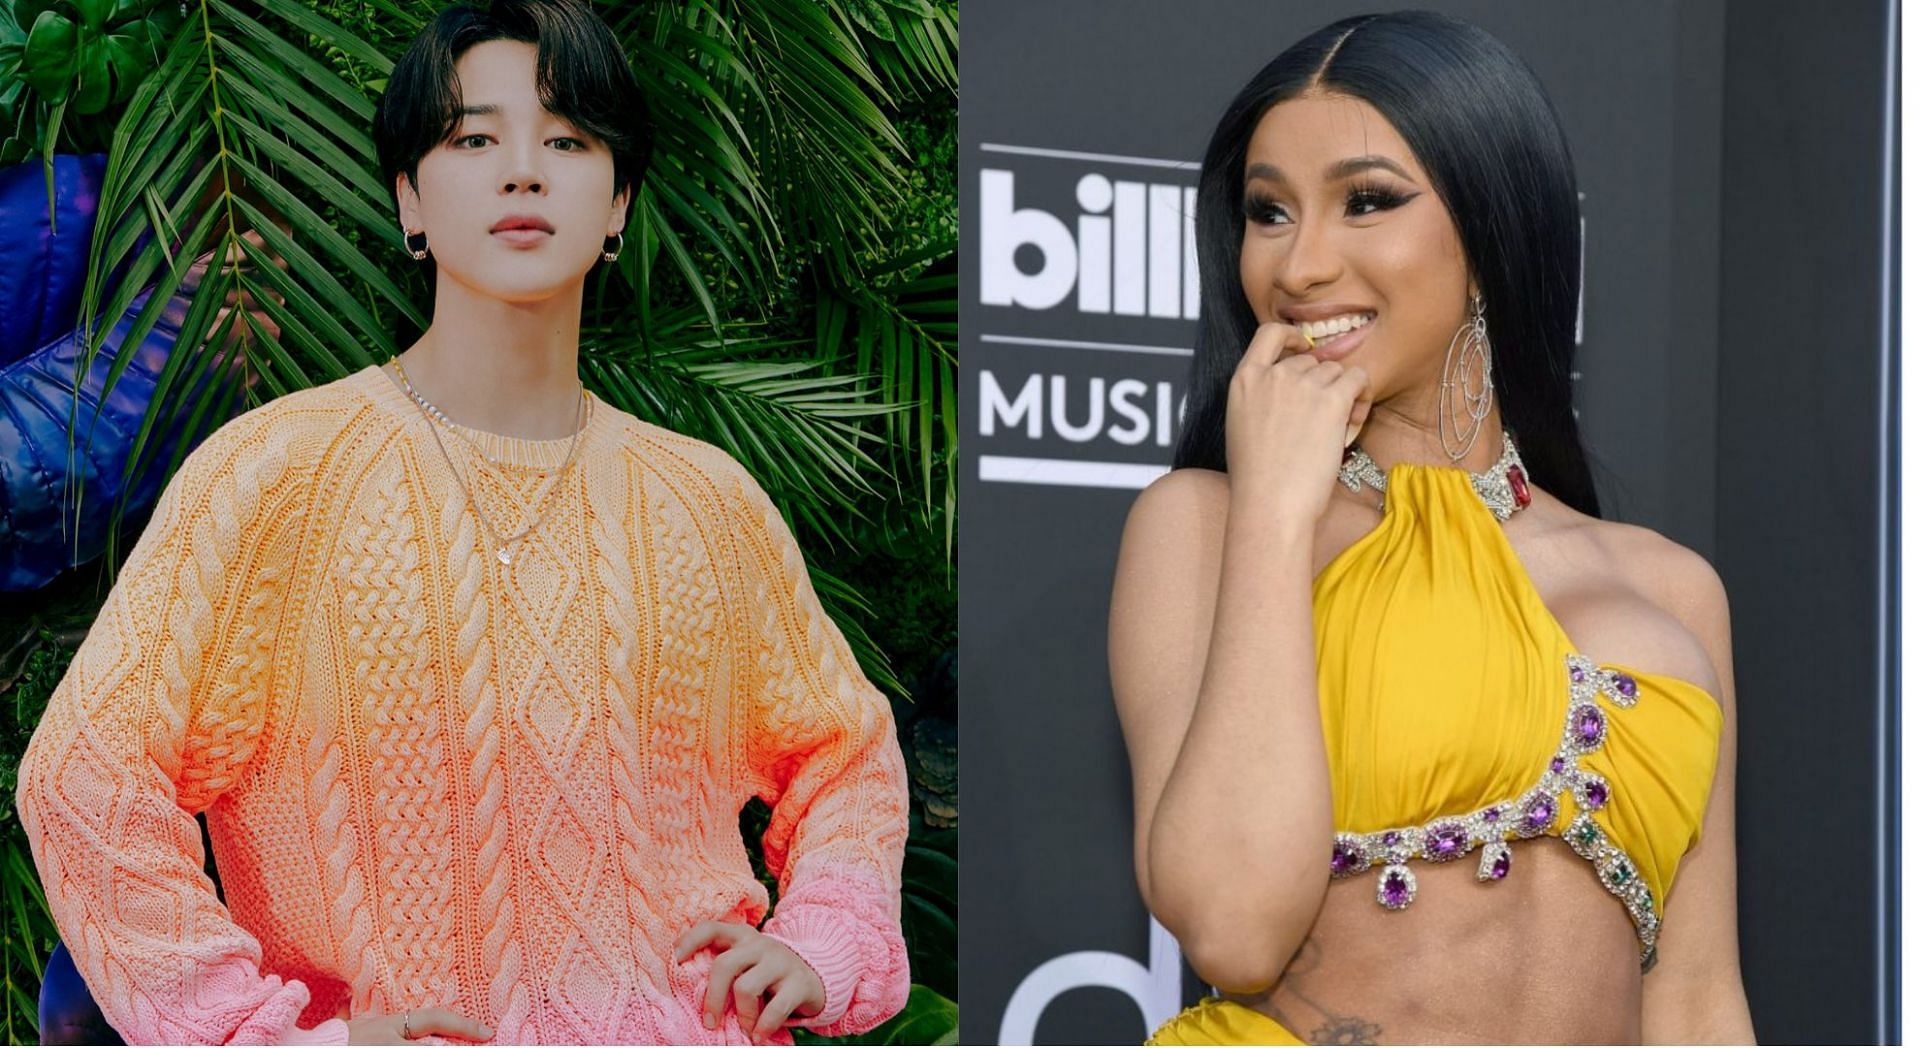 Park Jimin and Cardi B (Image via @bts_bighit/Twitter and Getty Images)